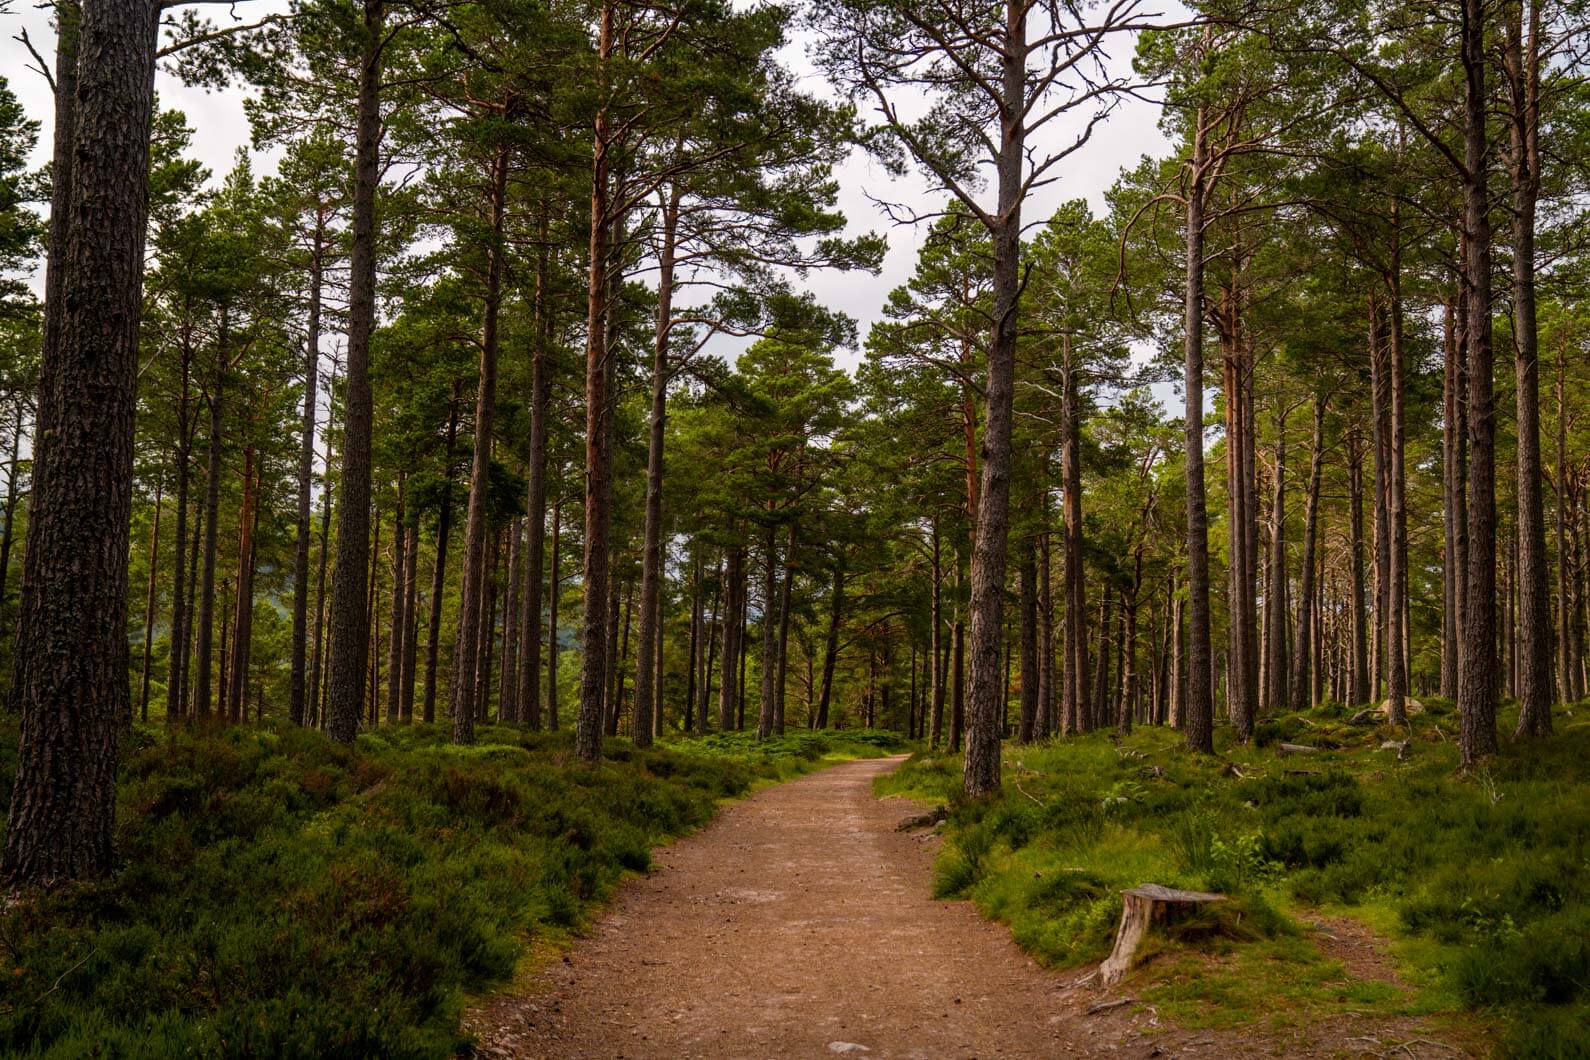 A complete guide to Cairngorms National Park, Scotland